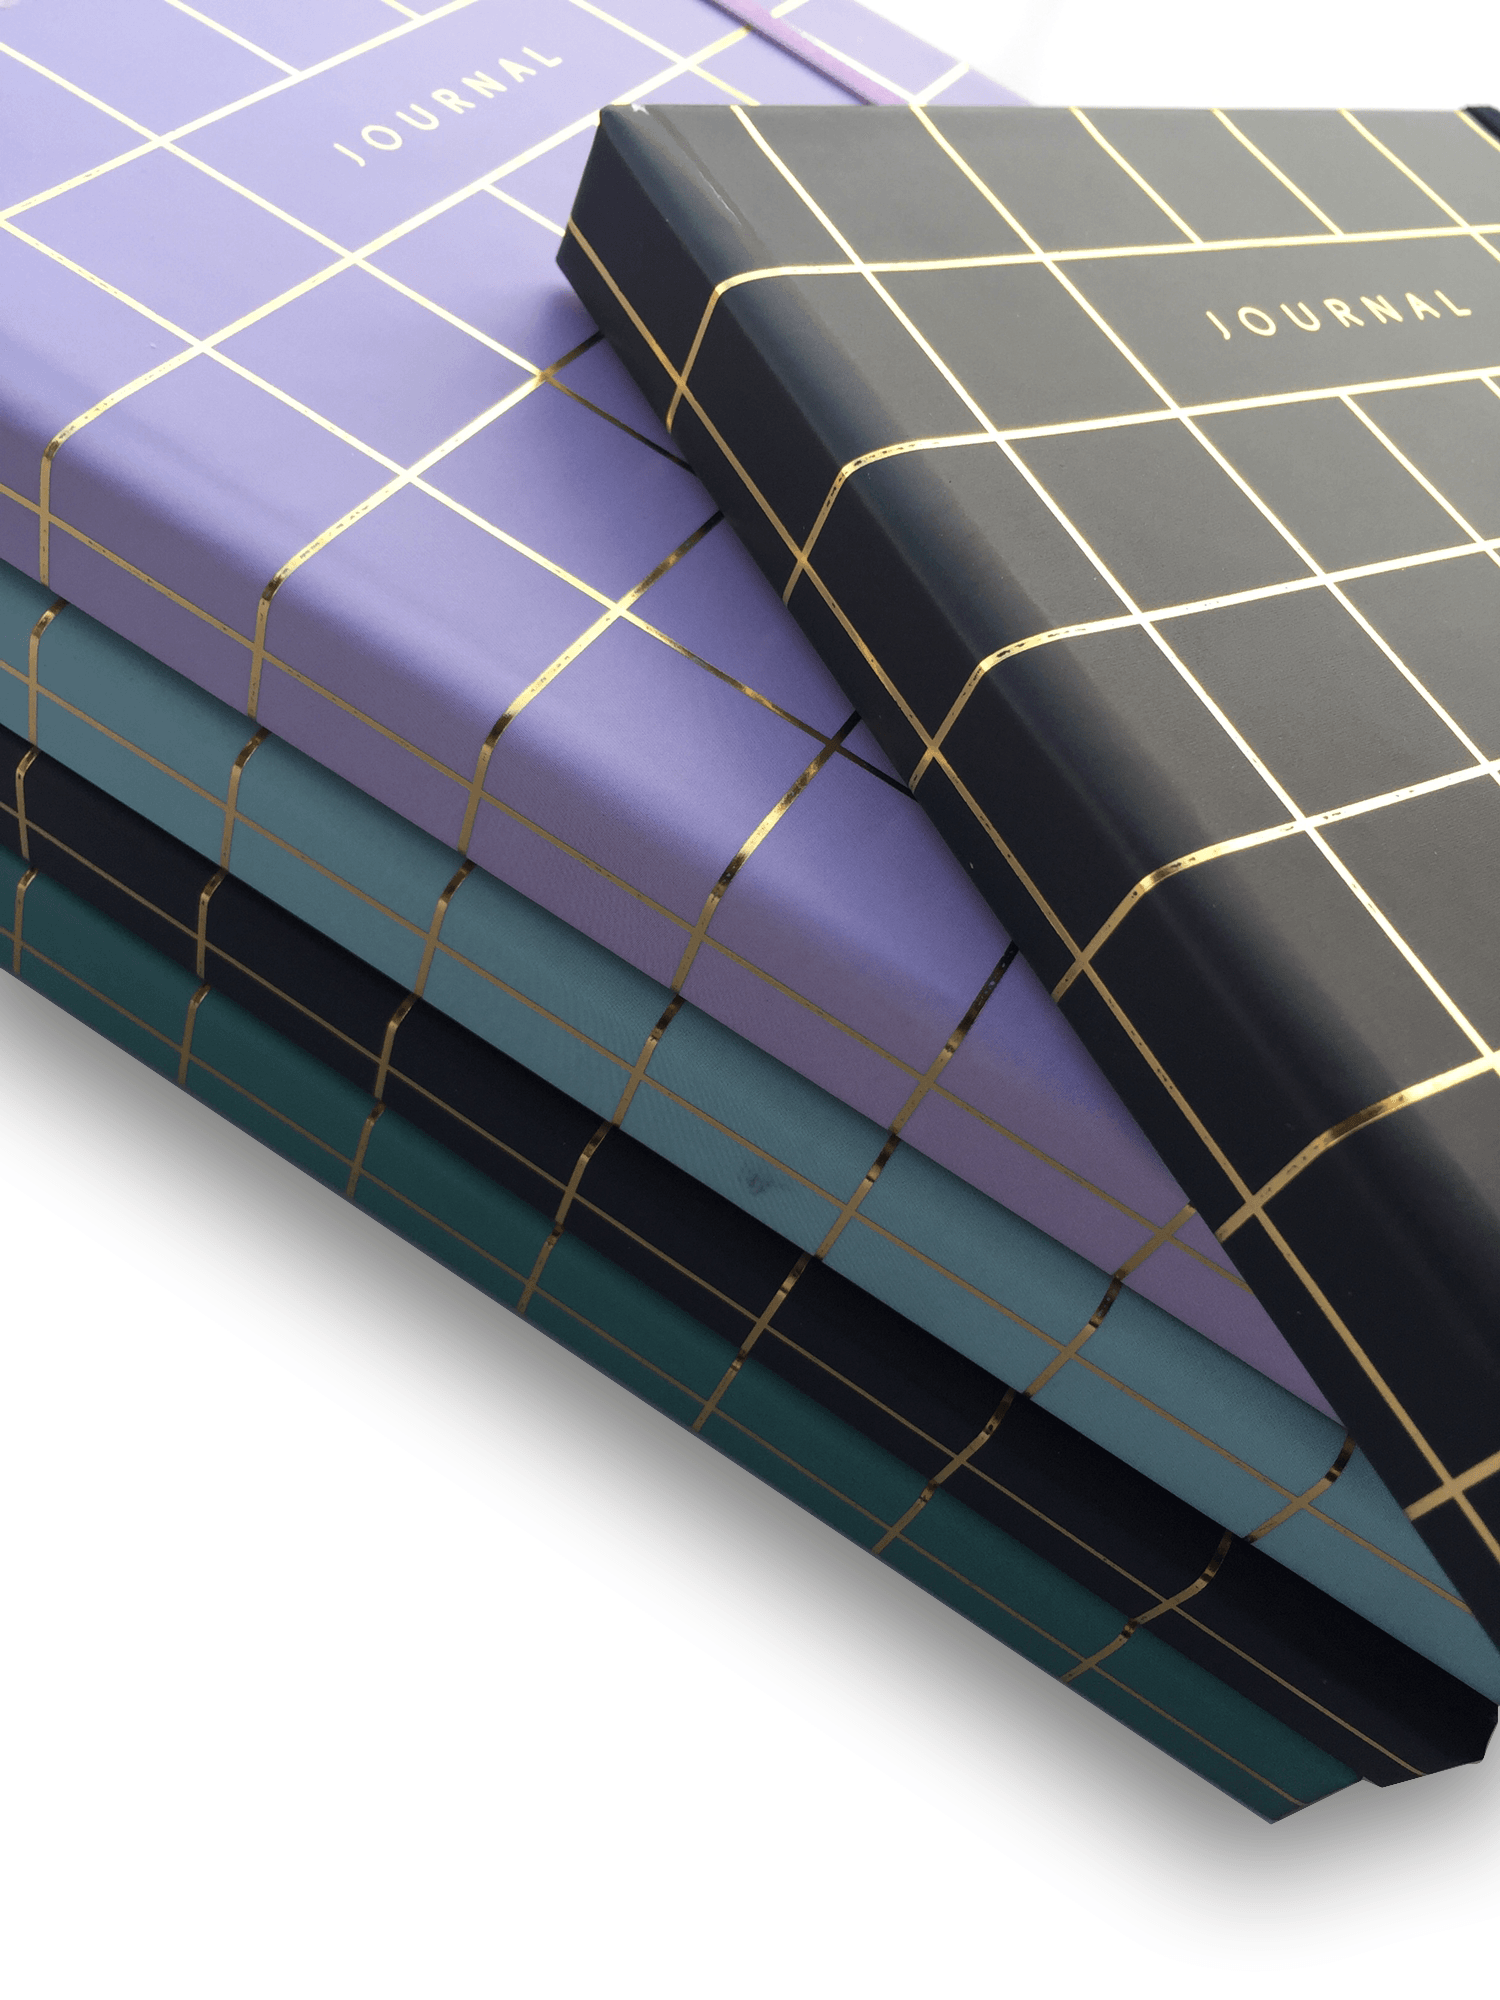 Gold Foiled Supreme Multi-Purpose Journal Notebook | Hardcover | Plain pages | Available in 5 colors - Supple Room